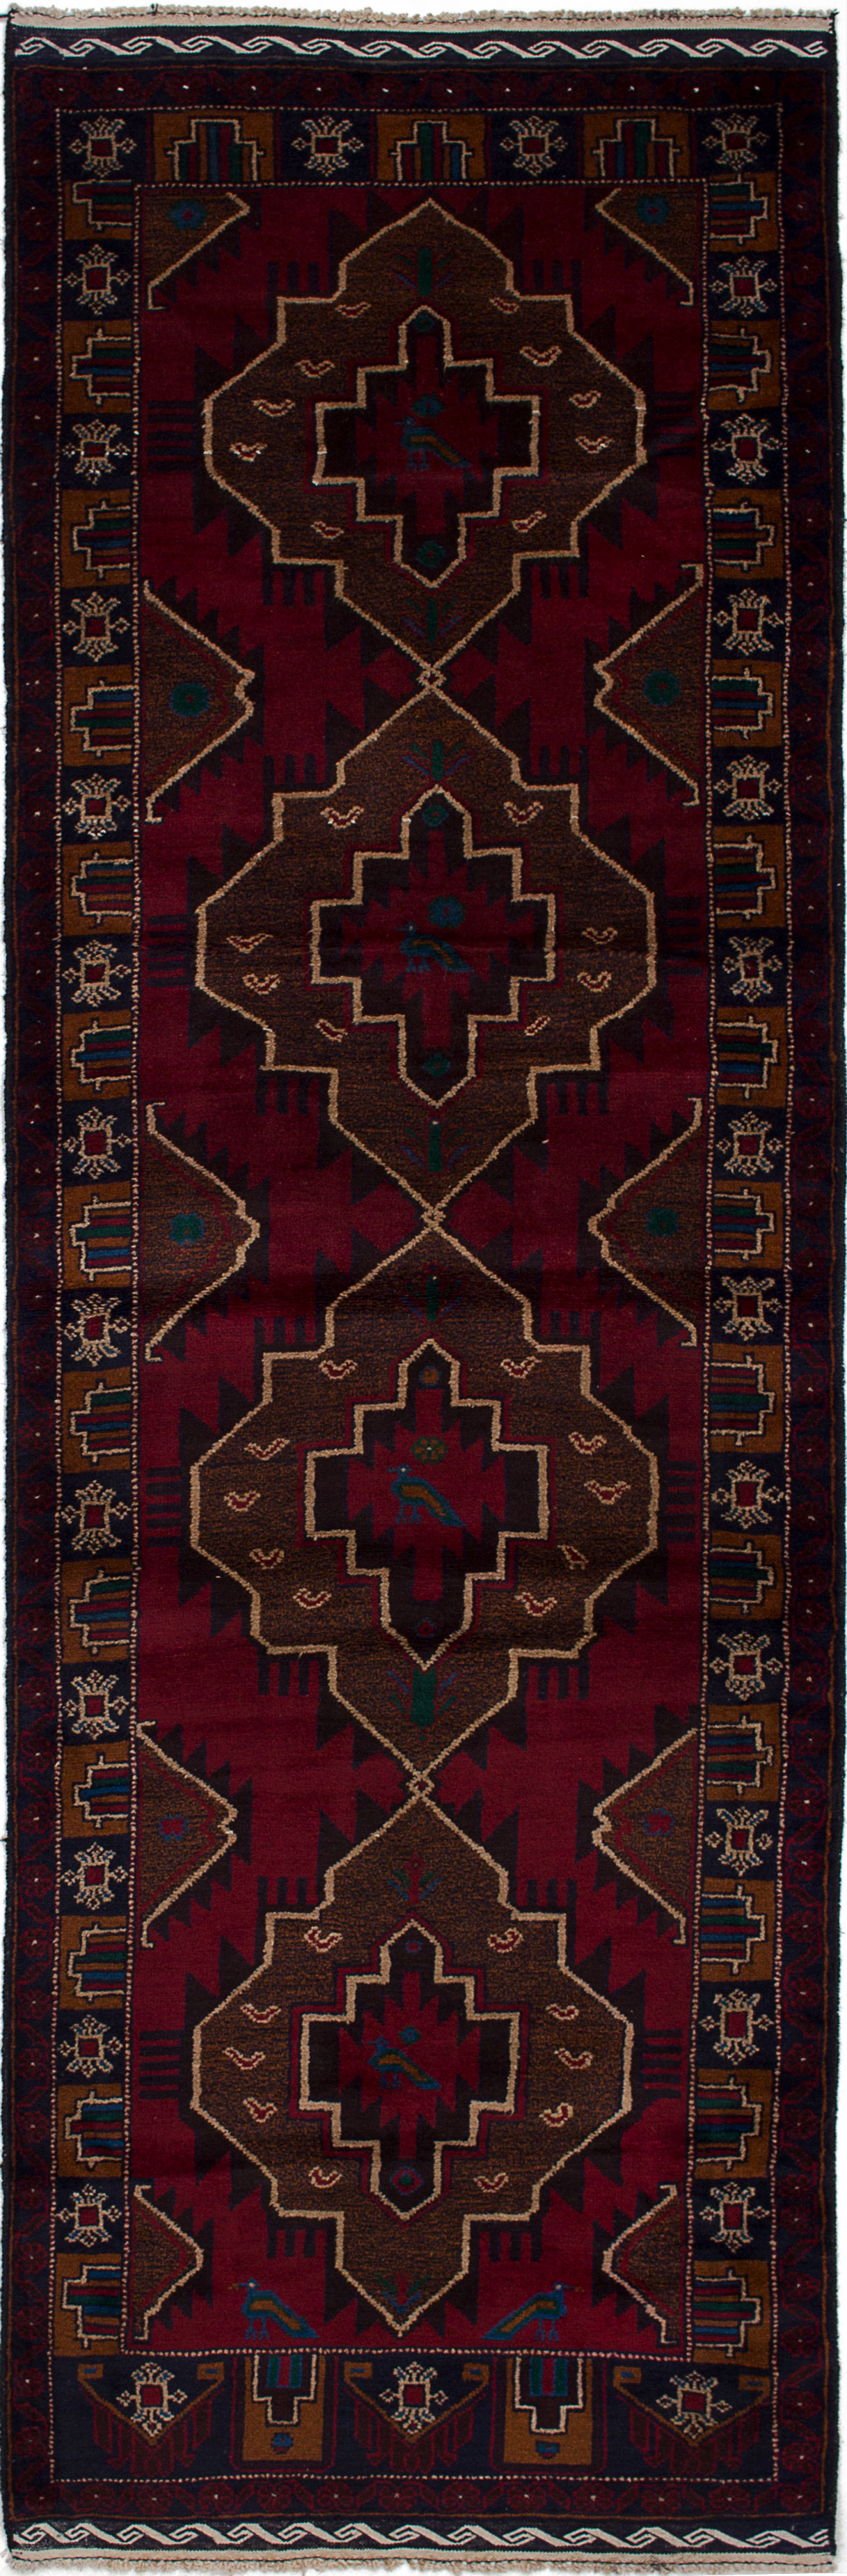 Hand-knotted Teimani Red Wool Rug 2'11" x 9'5" Size: 2'11" x 9'5"  